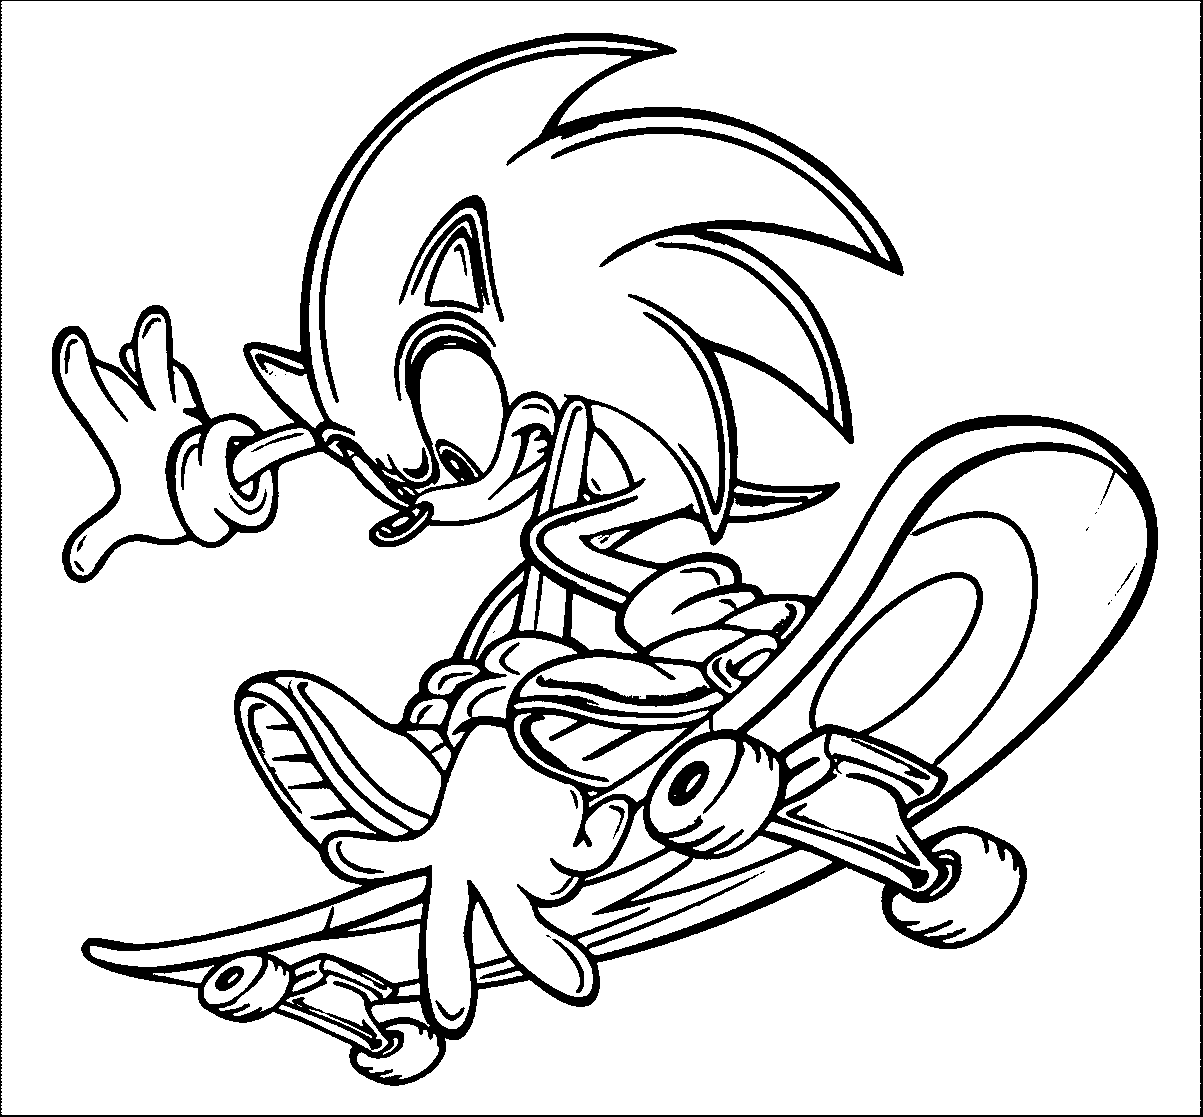 Download Sonic Skateboarding Coloring Page - Free Printable Coloring Pages for Kids